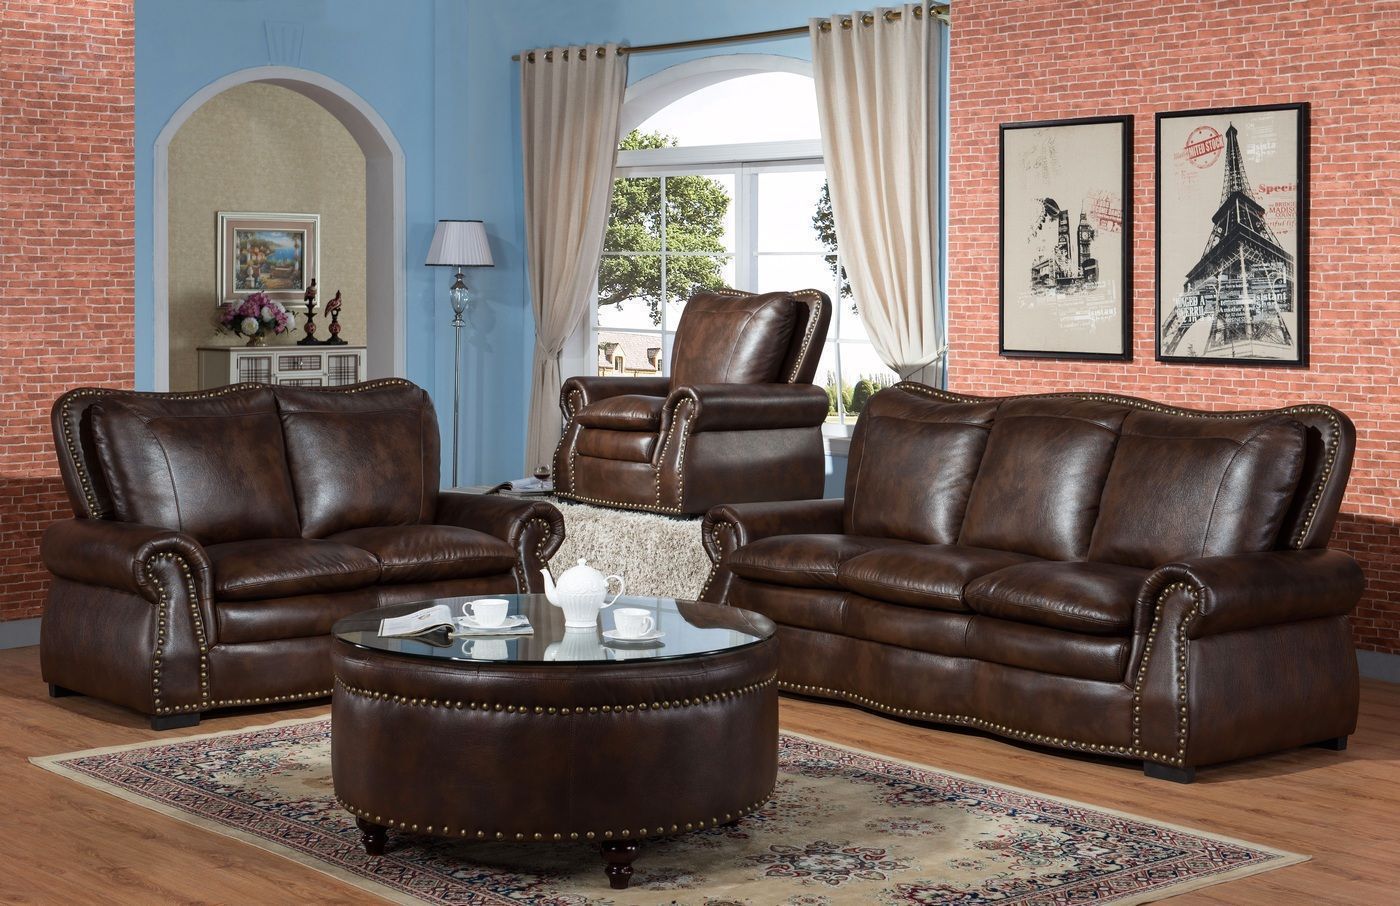 Lincoln Traditional Brown Sofa In Premium Leather Air Fabric Inside Traditional Fabric Sofas (View 1 of 15)